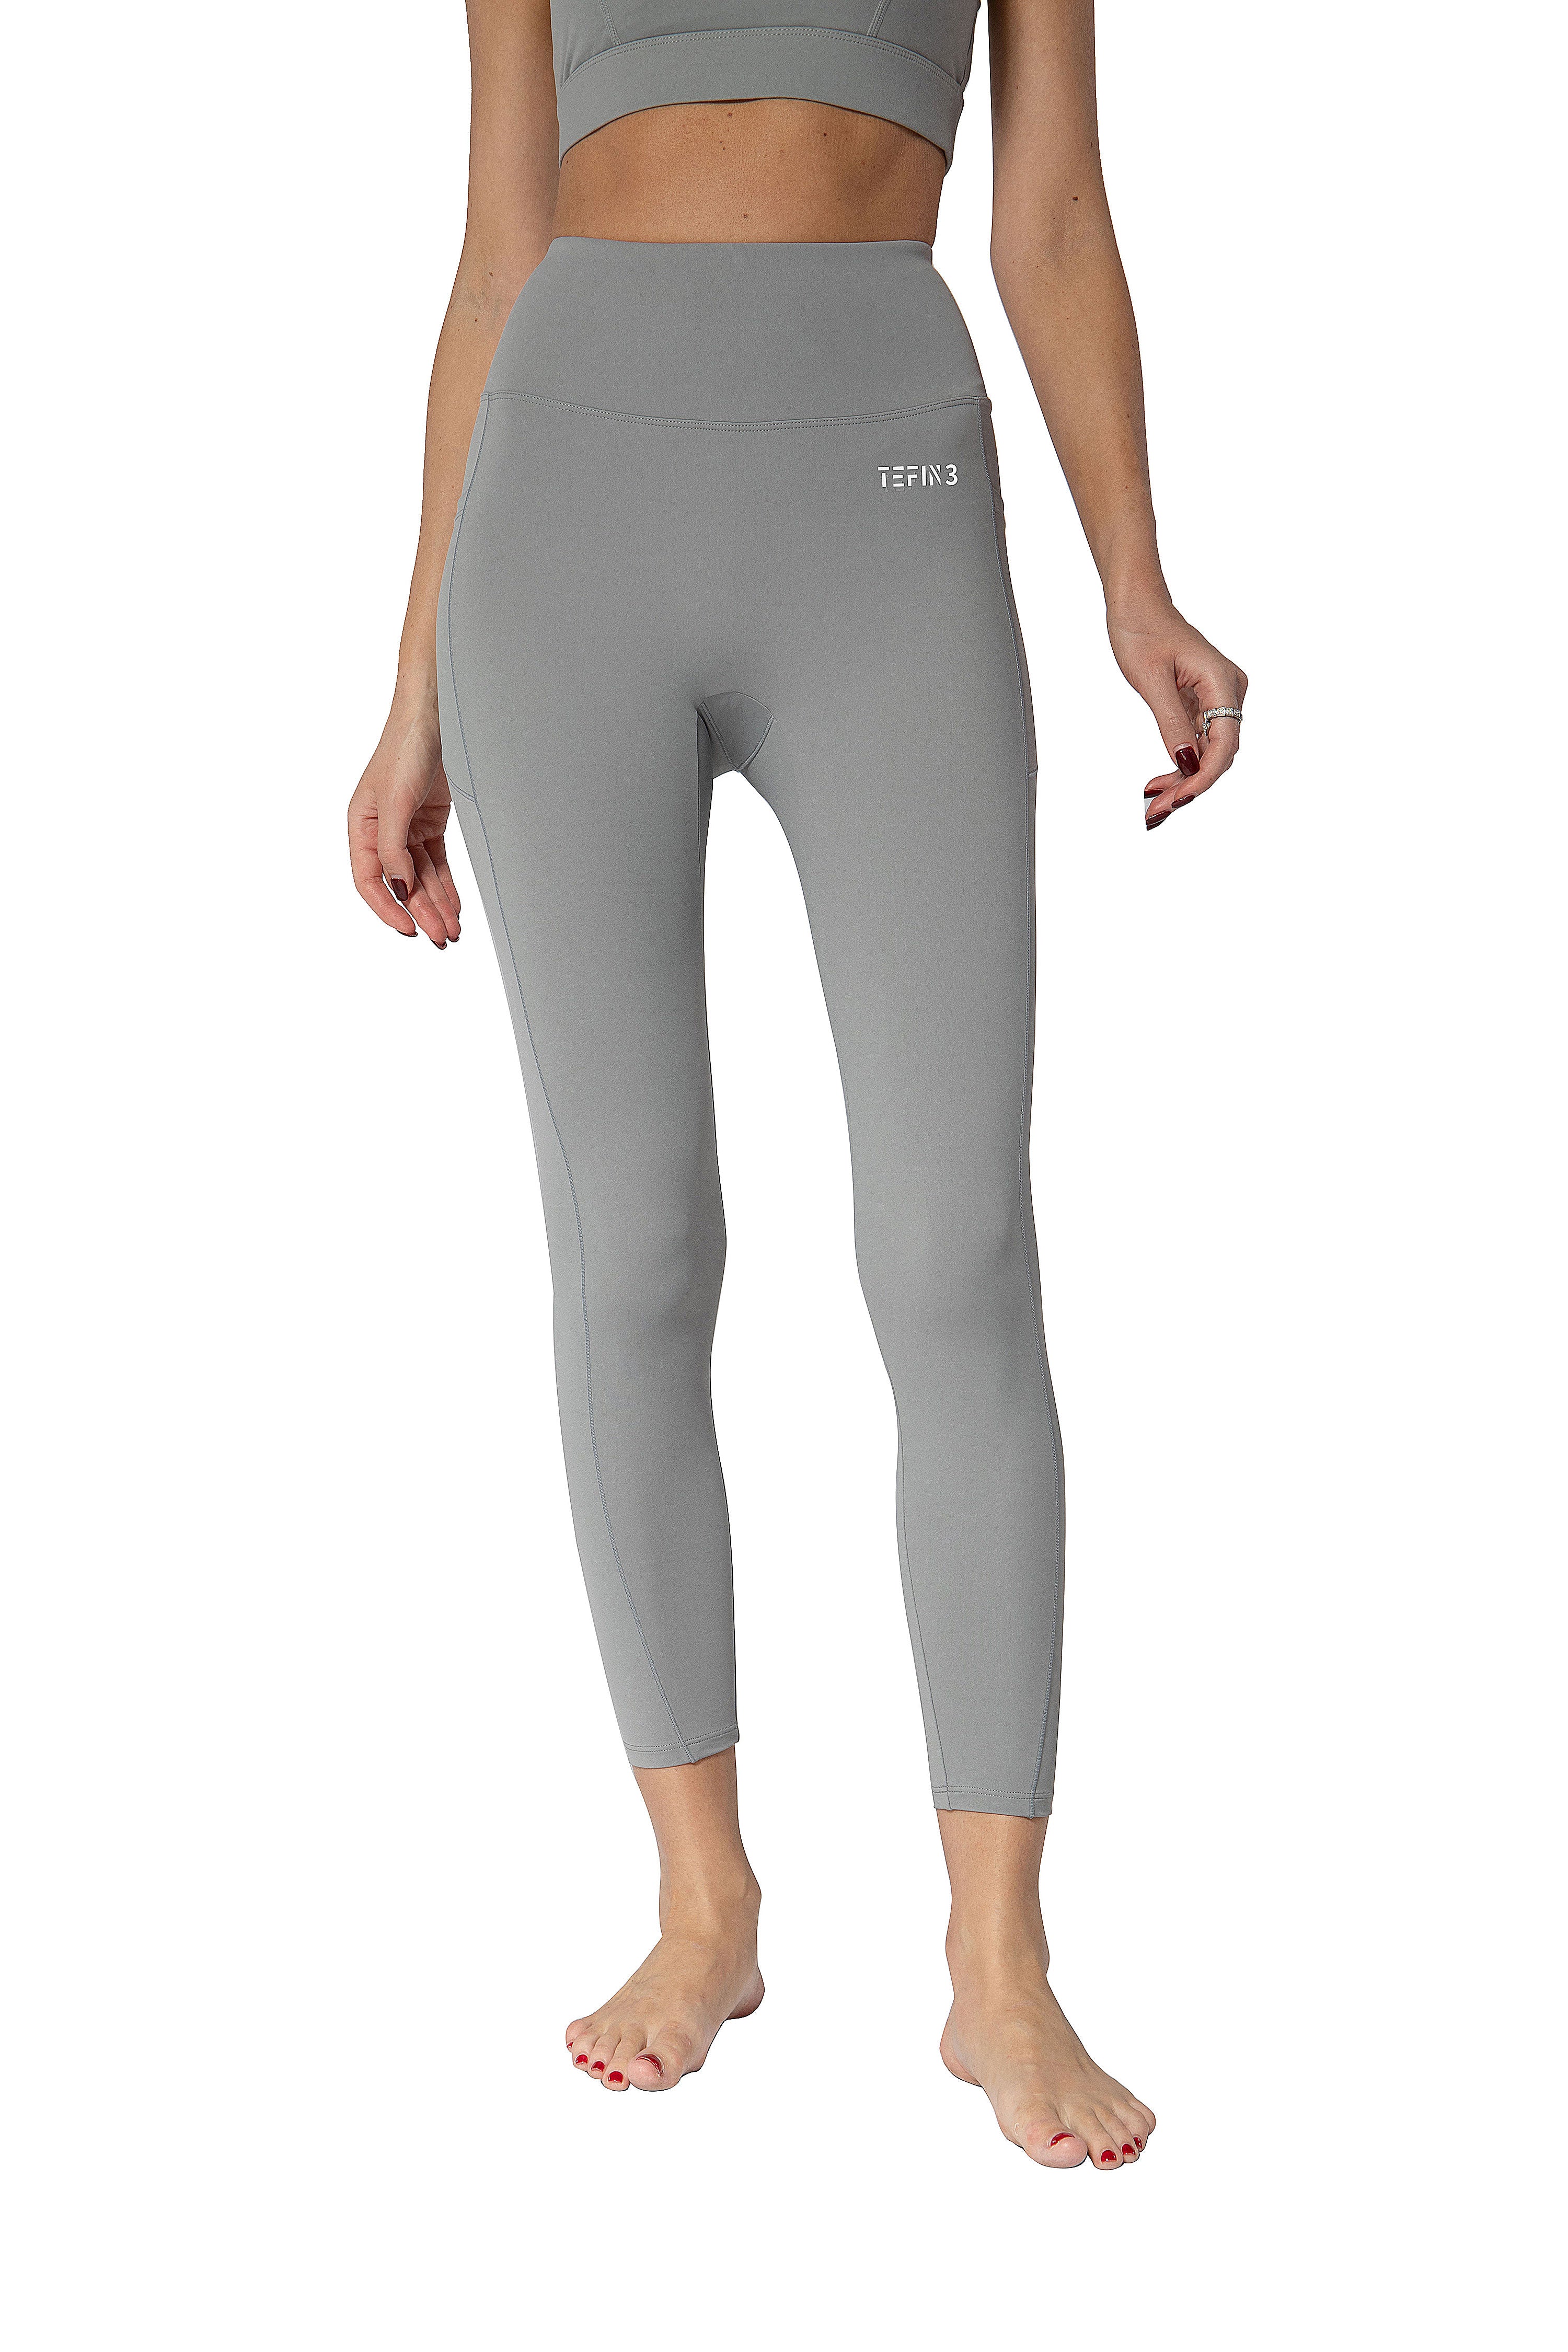 Full Length Compression Leggings - Grey Sage *3XL Only* – Bunky